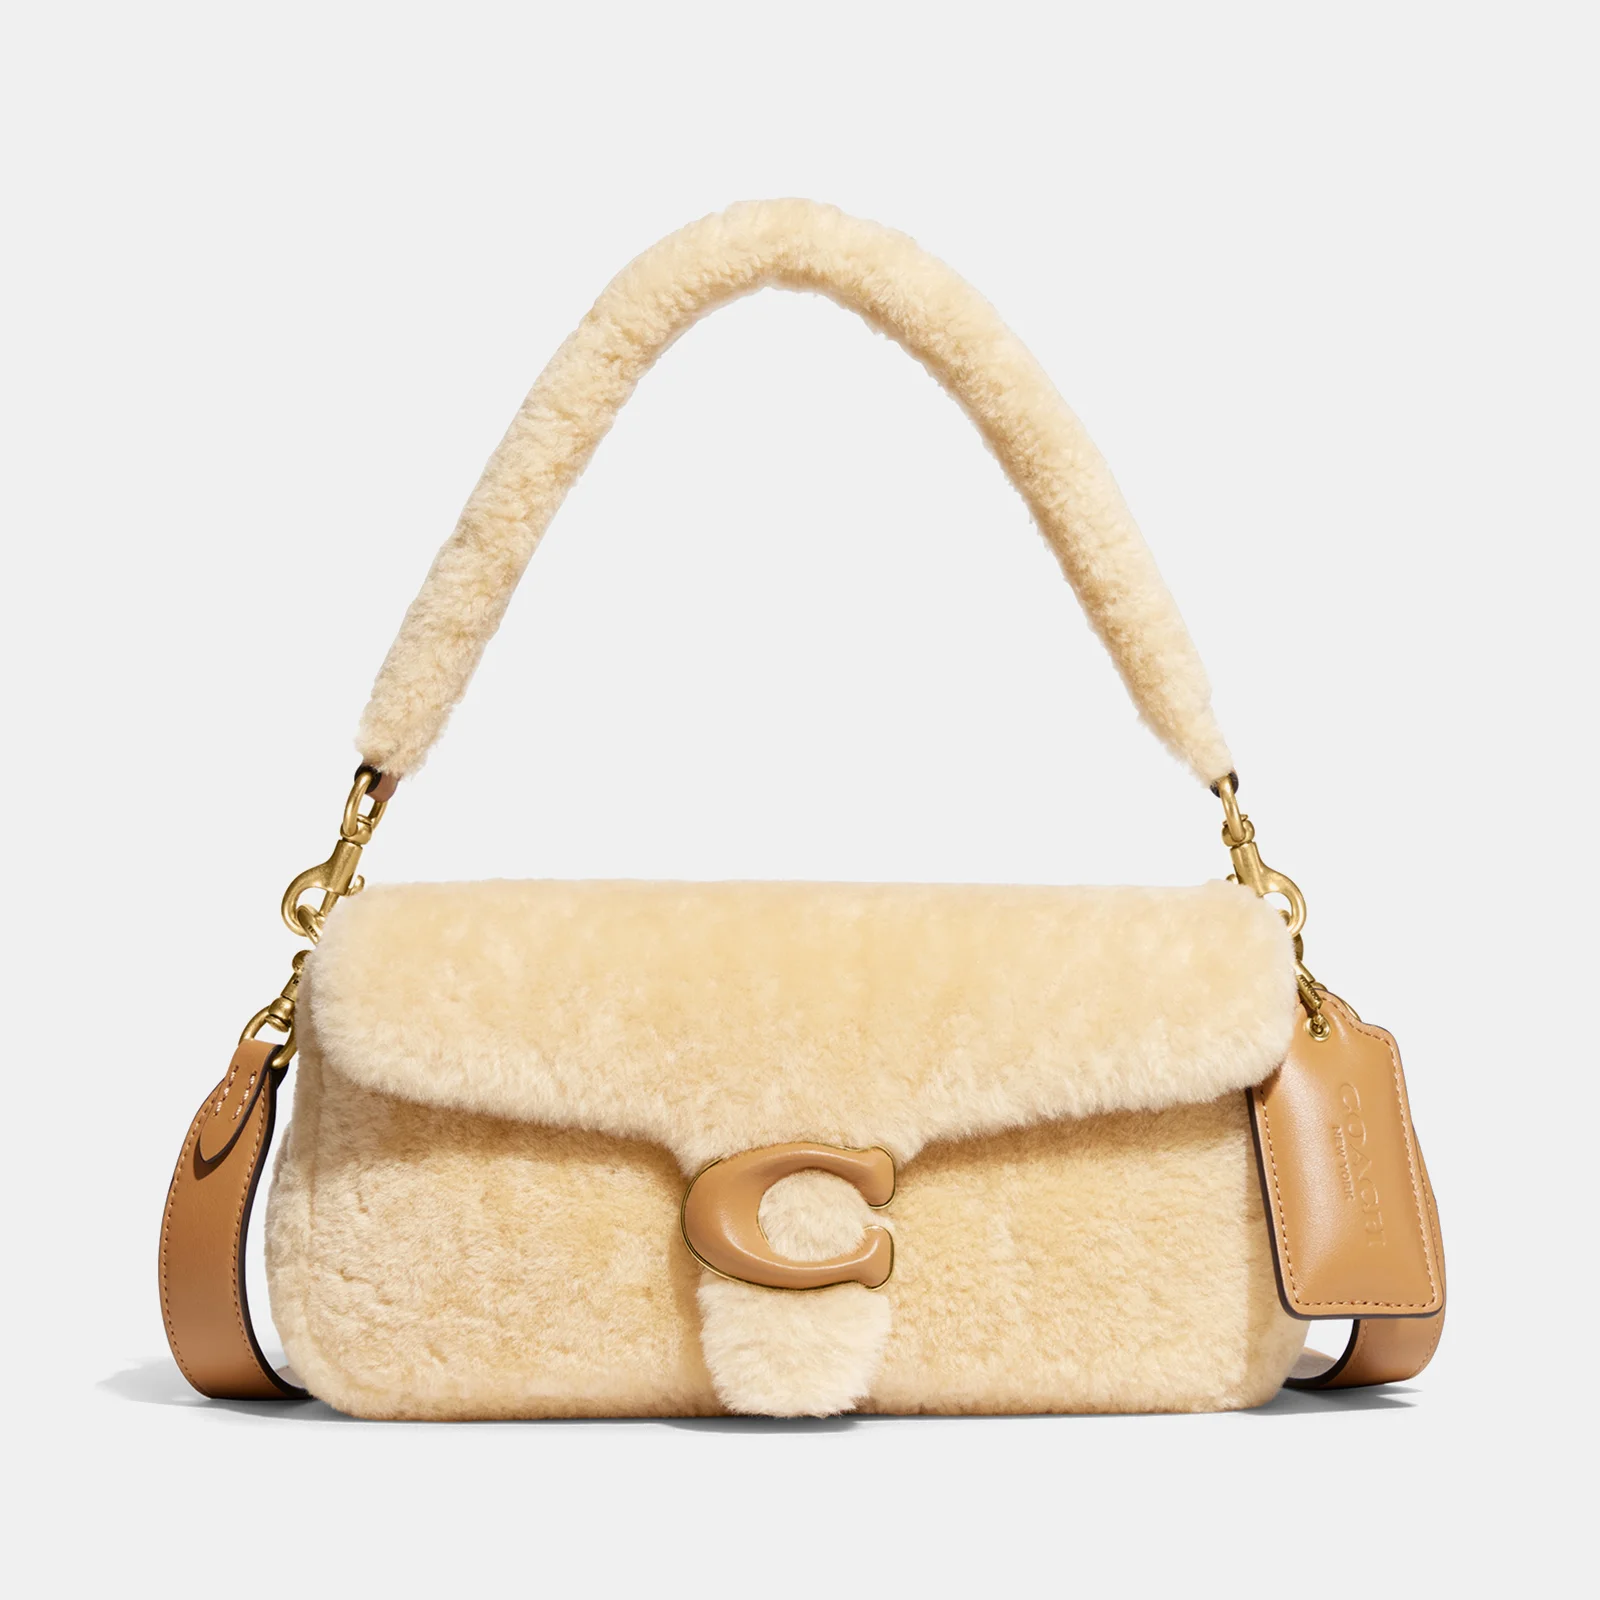 Coach Pillow Tabby 26 Shearling and Leather Bag Image 1